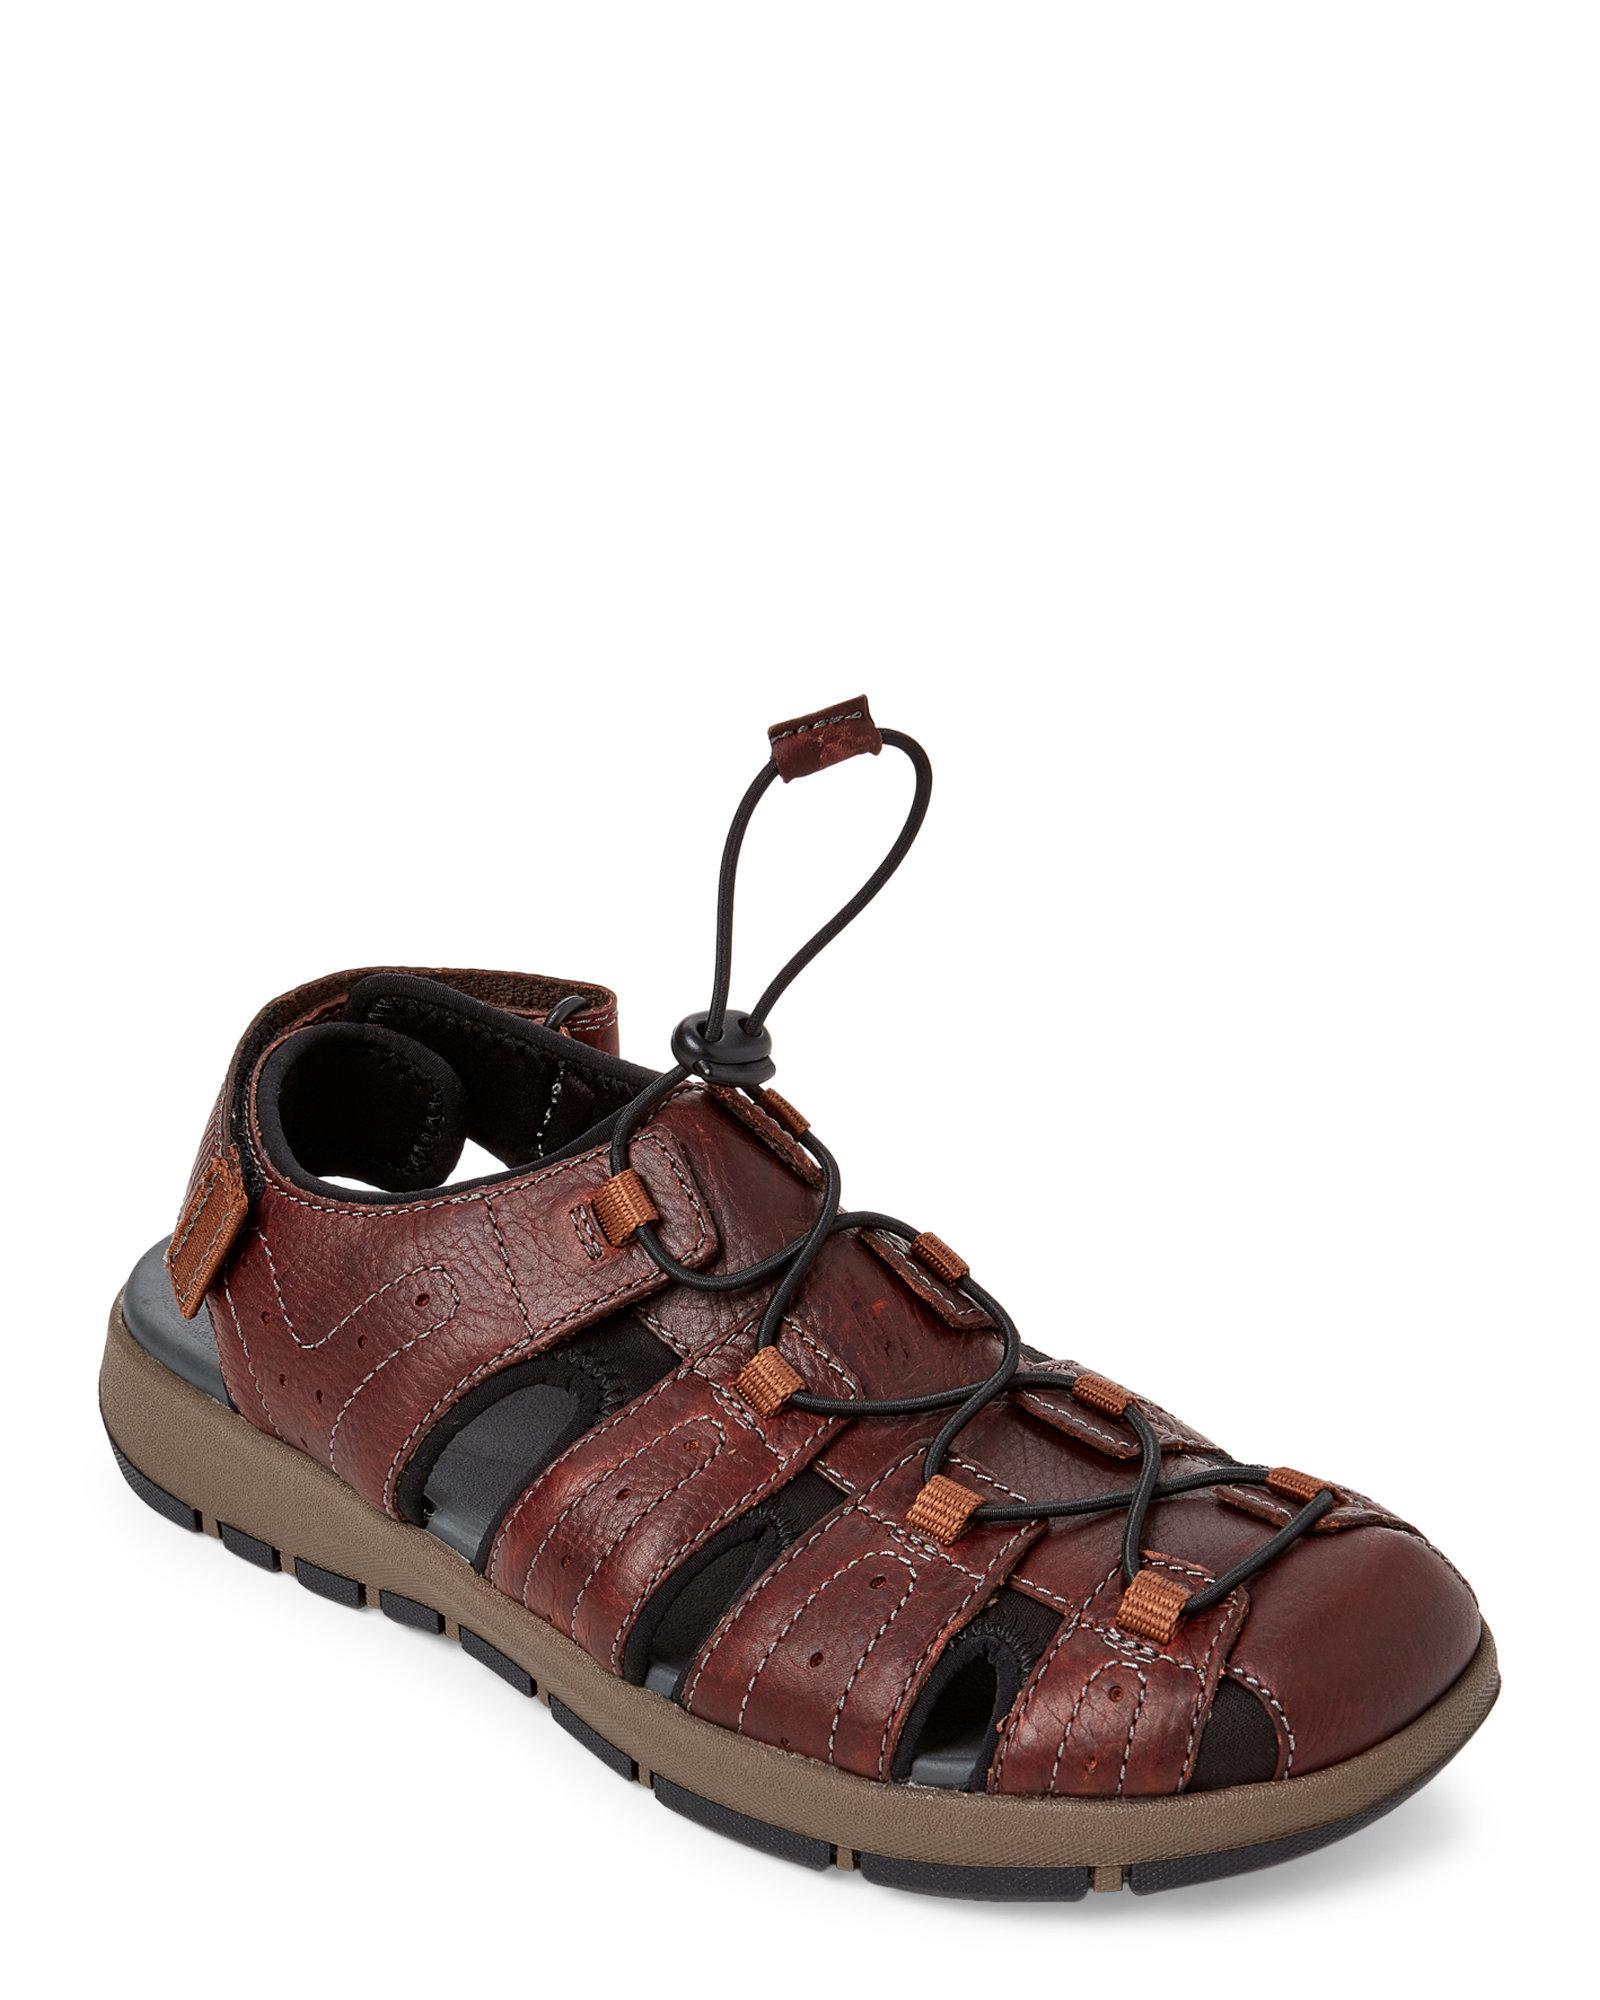 brixby cove sandals